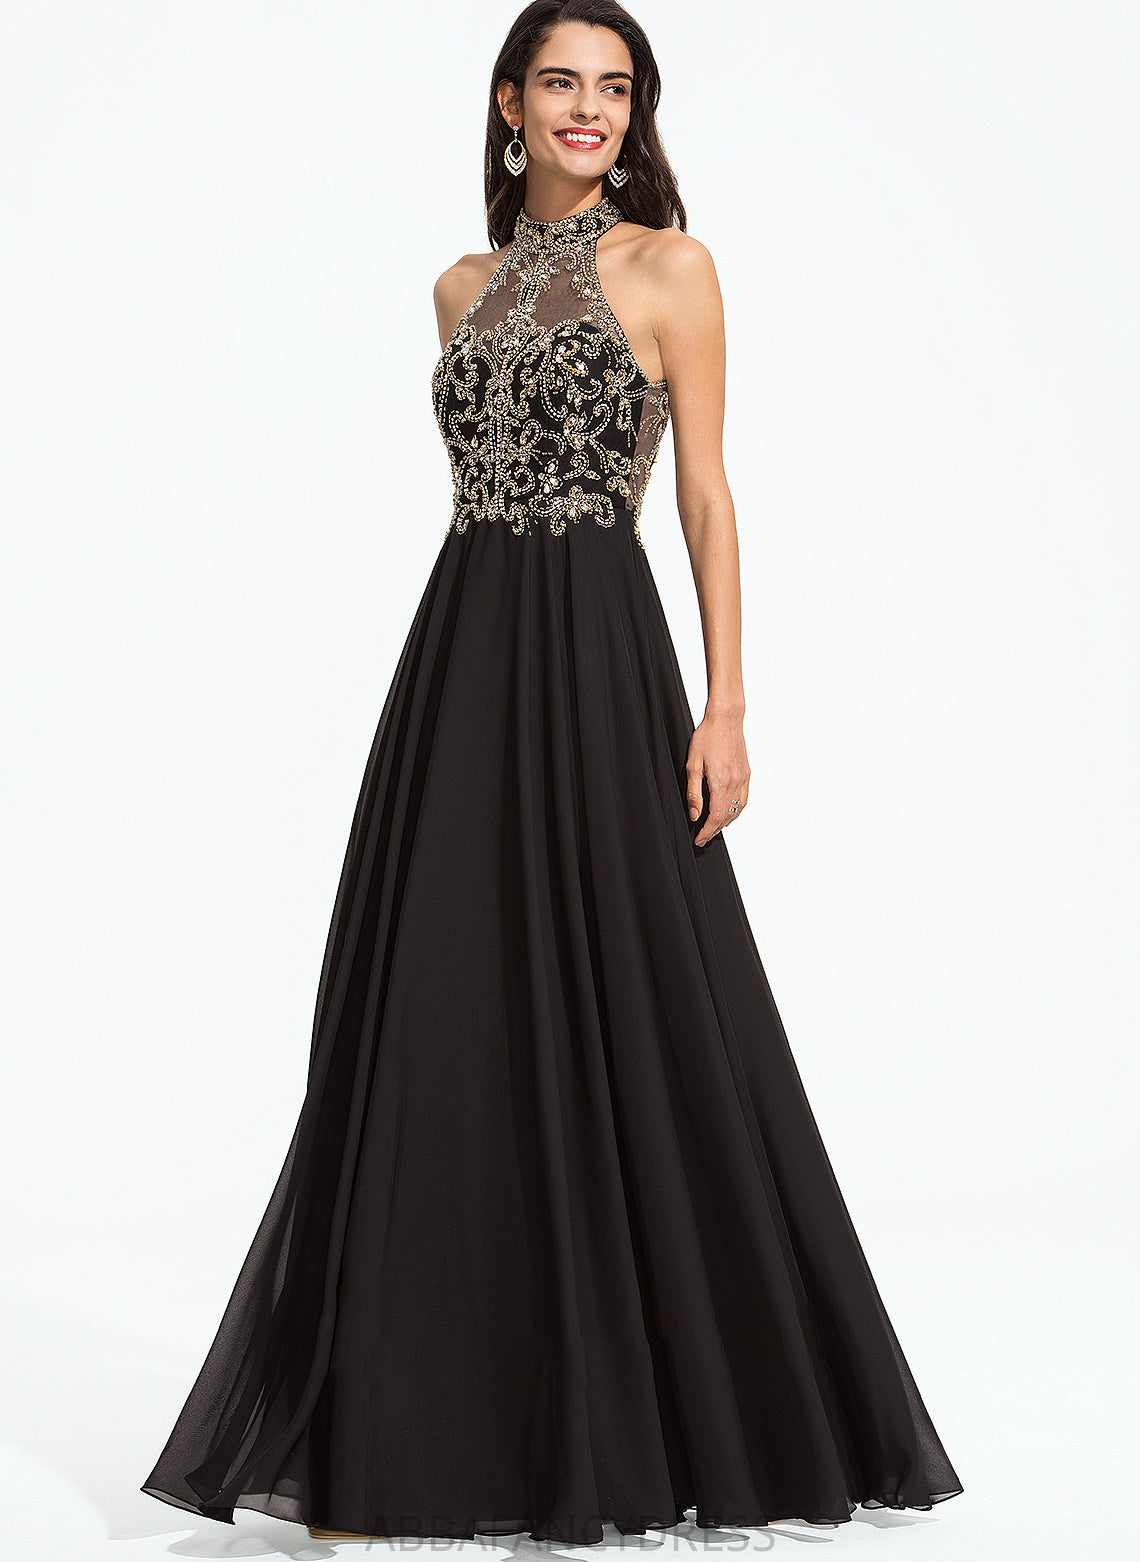 Sequins Mckenna High Prom Dresses Chiffon Neck With Floor-Length A-Line Beading